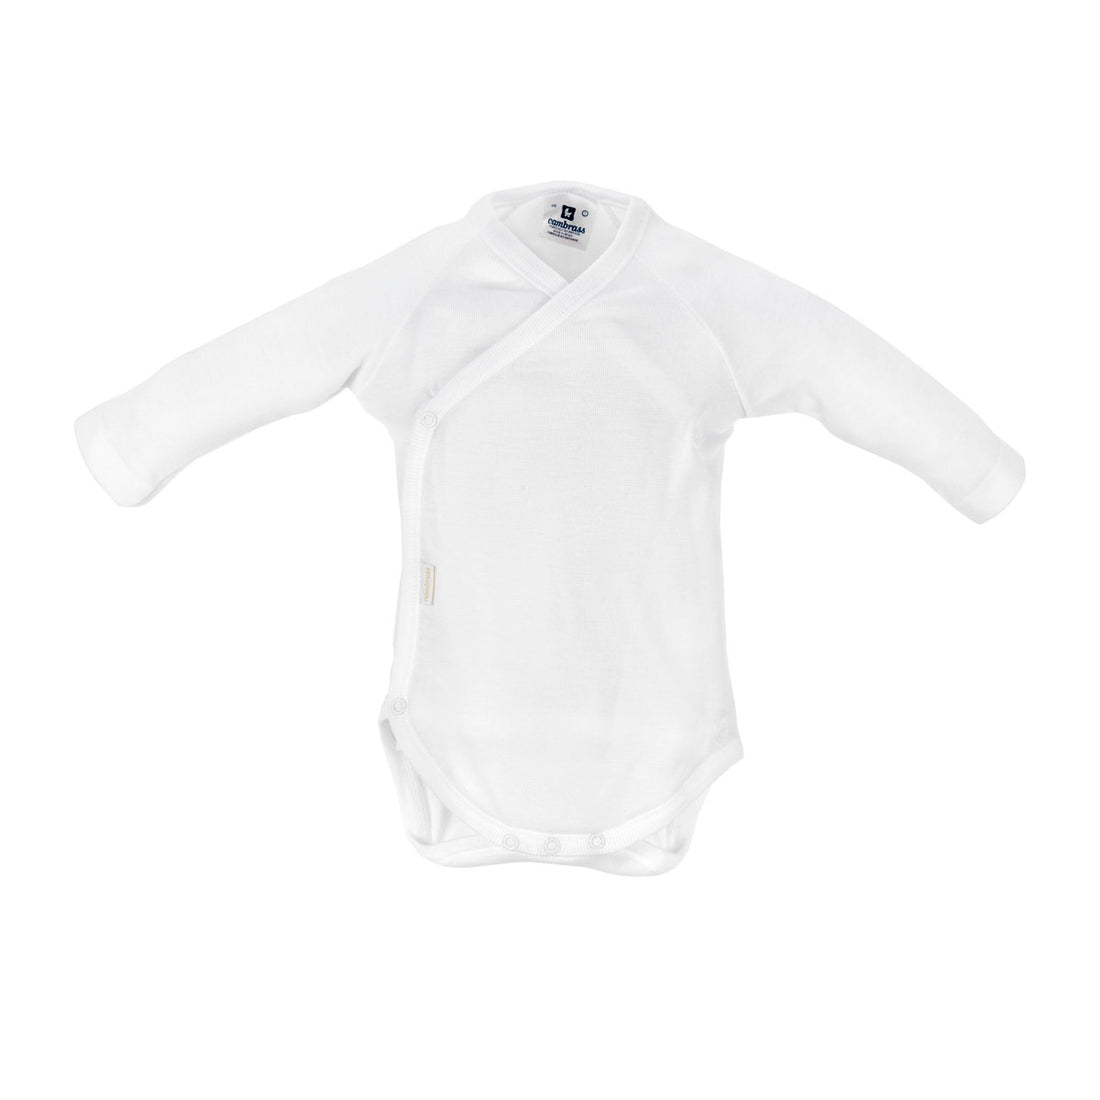 r&j-cambrass-sa-body-l.sleeve-crossed-110-white- (1)